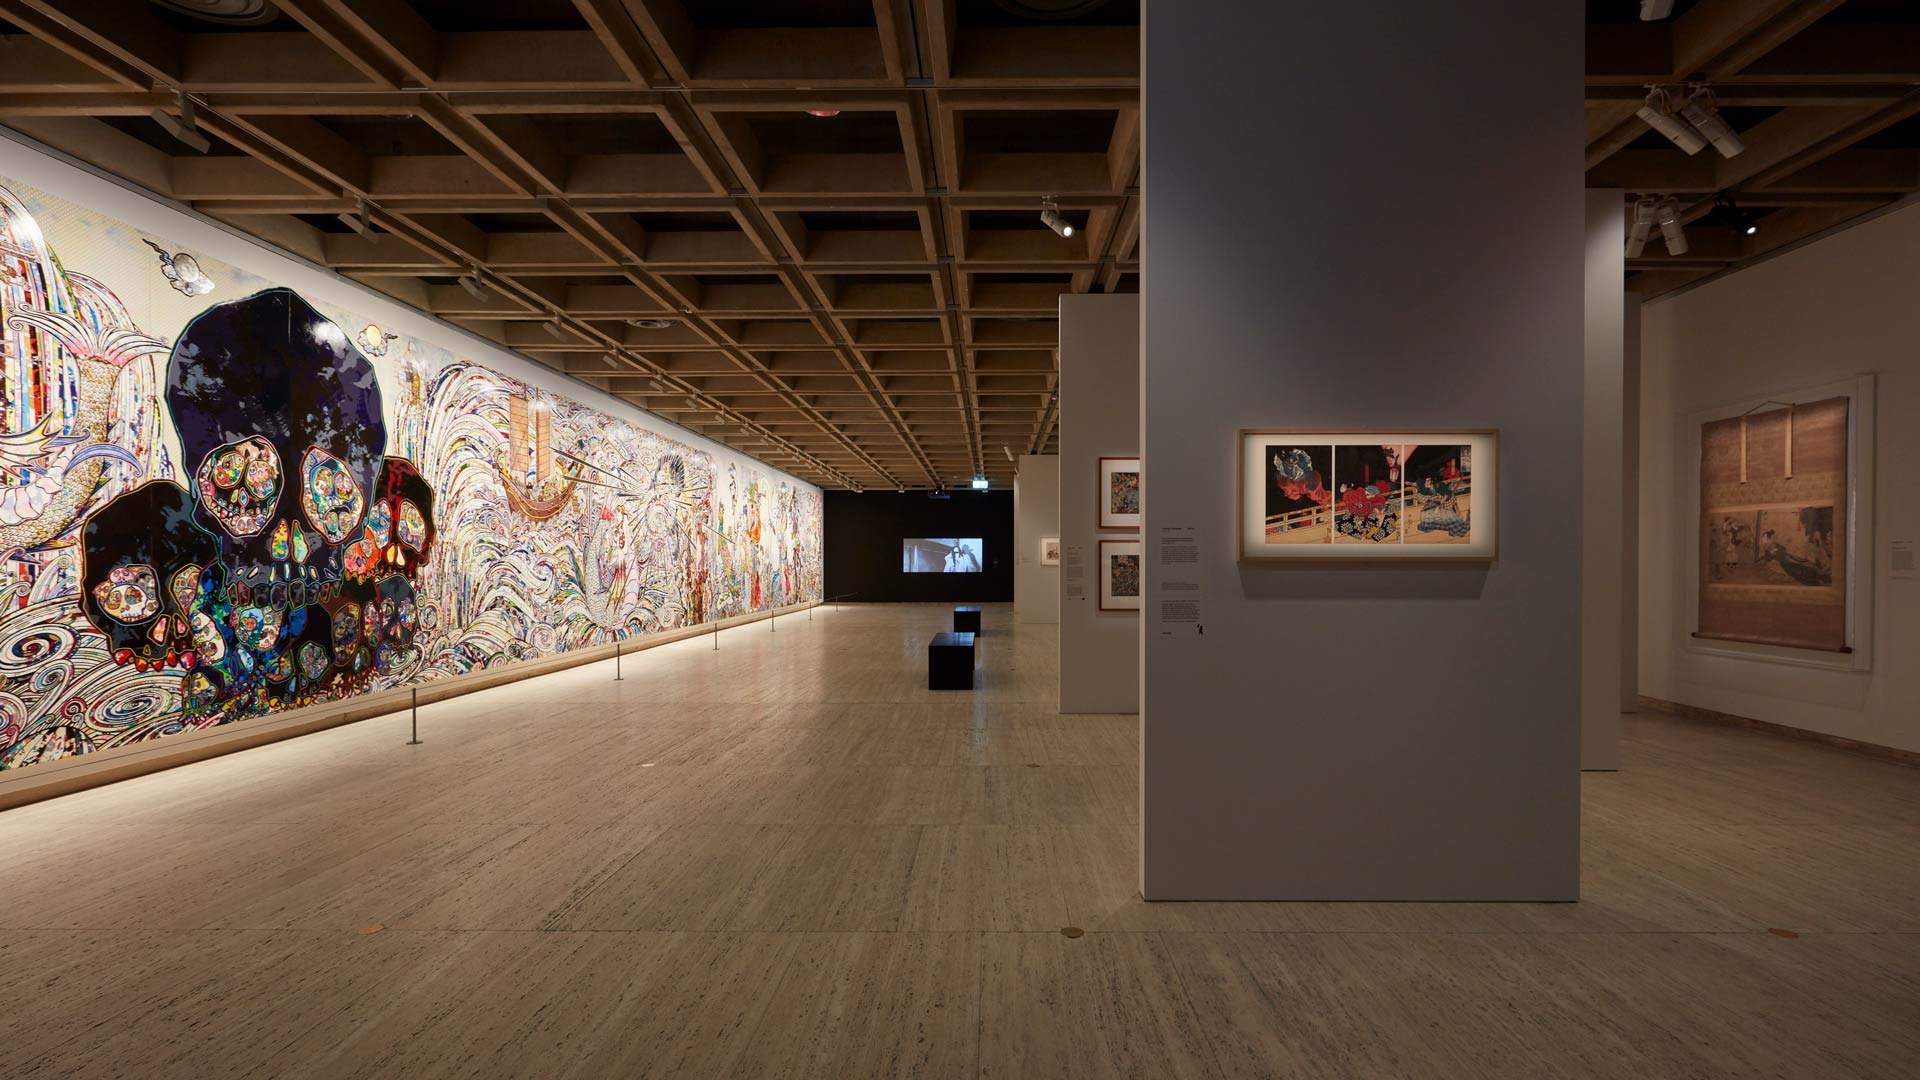 We're Giving Away Double Passes to the Art Gallery of NSW's Massive Japanese Art Exhibition